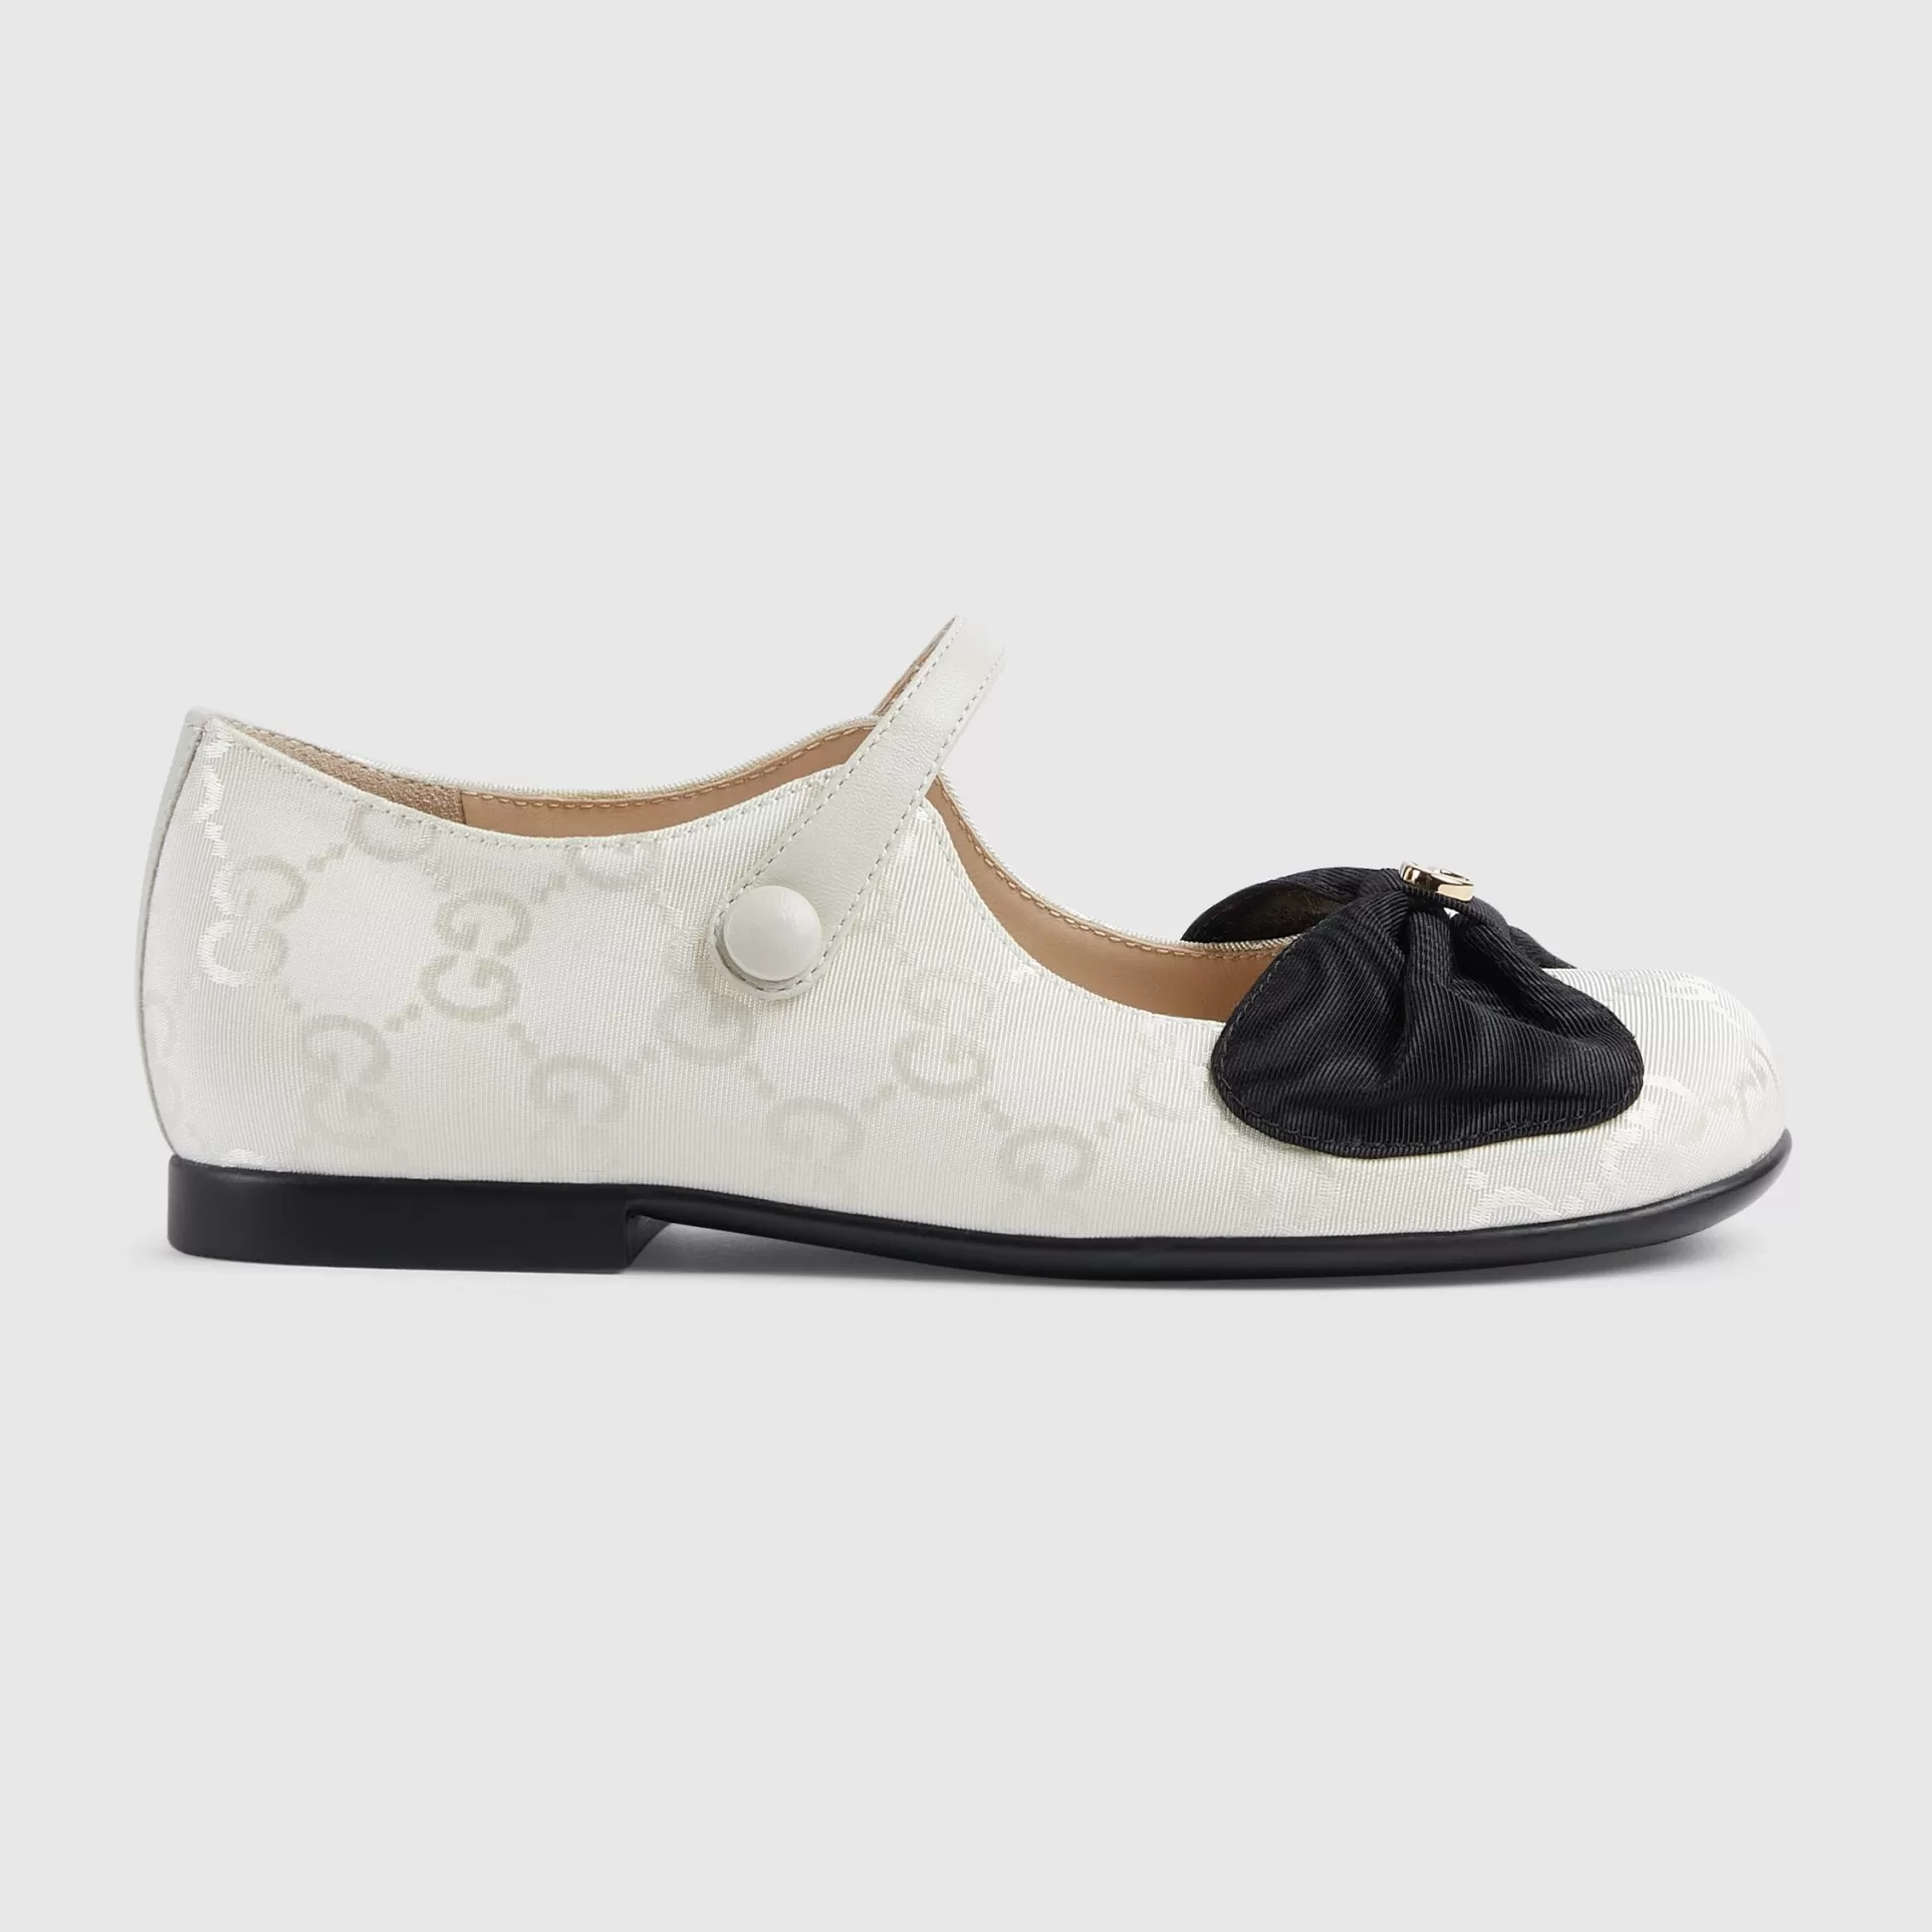 GUCCI Toddler Ballerina Flat With Bow-Children Toddler Shoes (20-26)